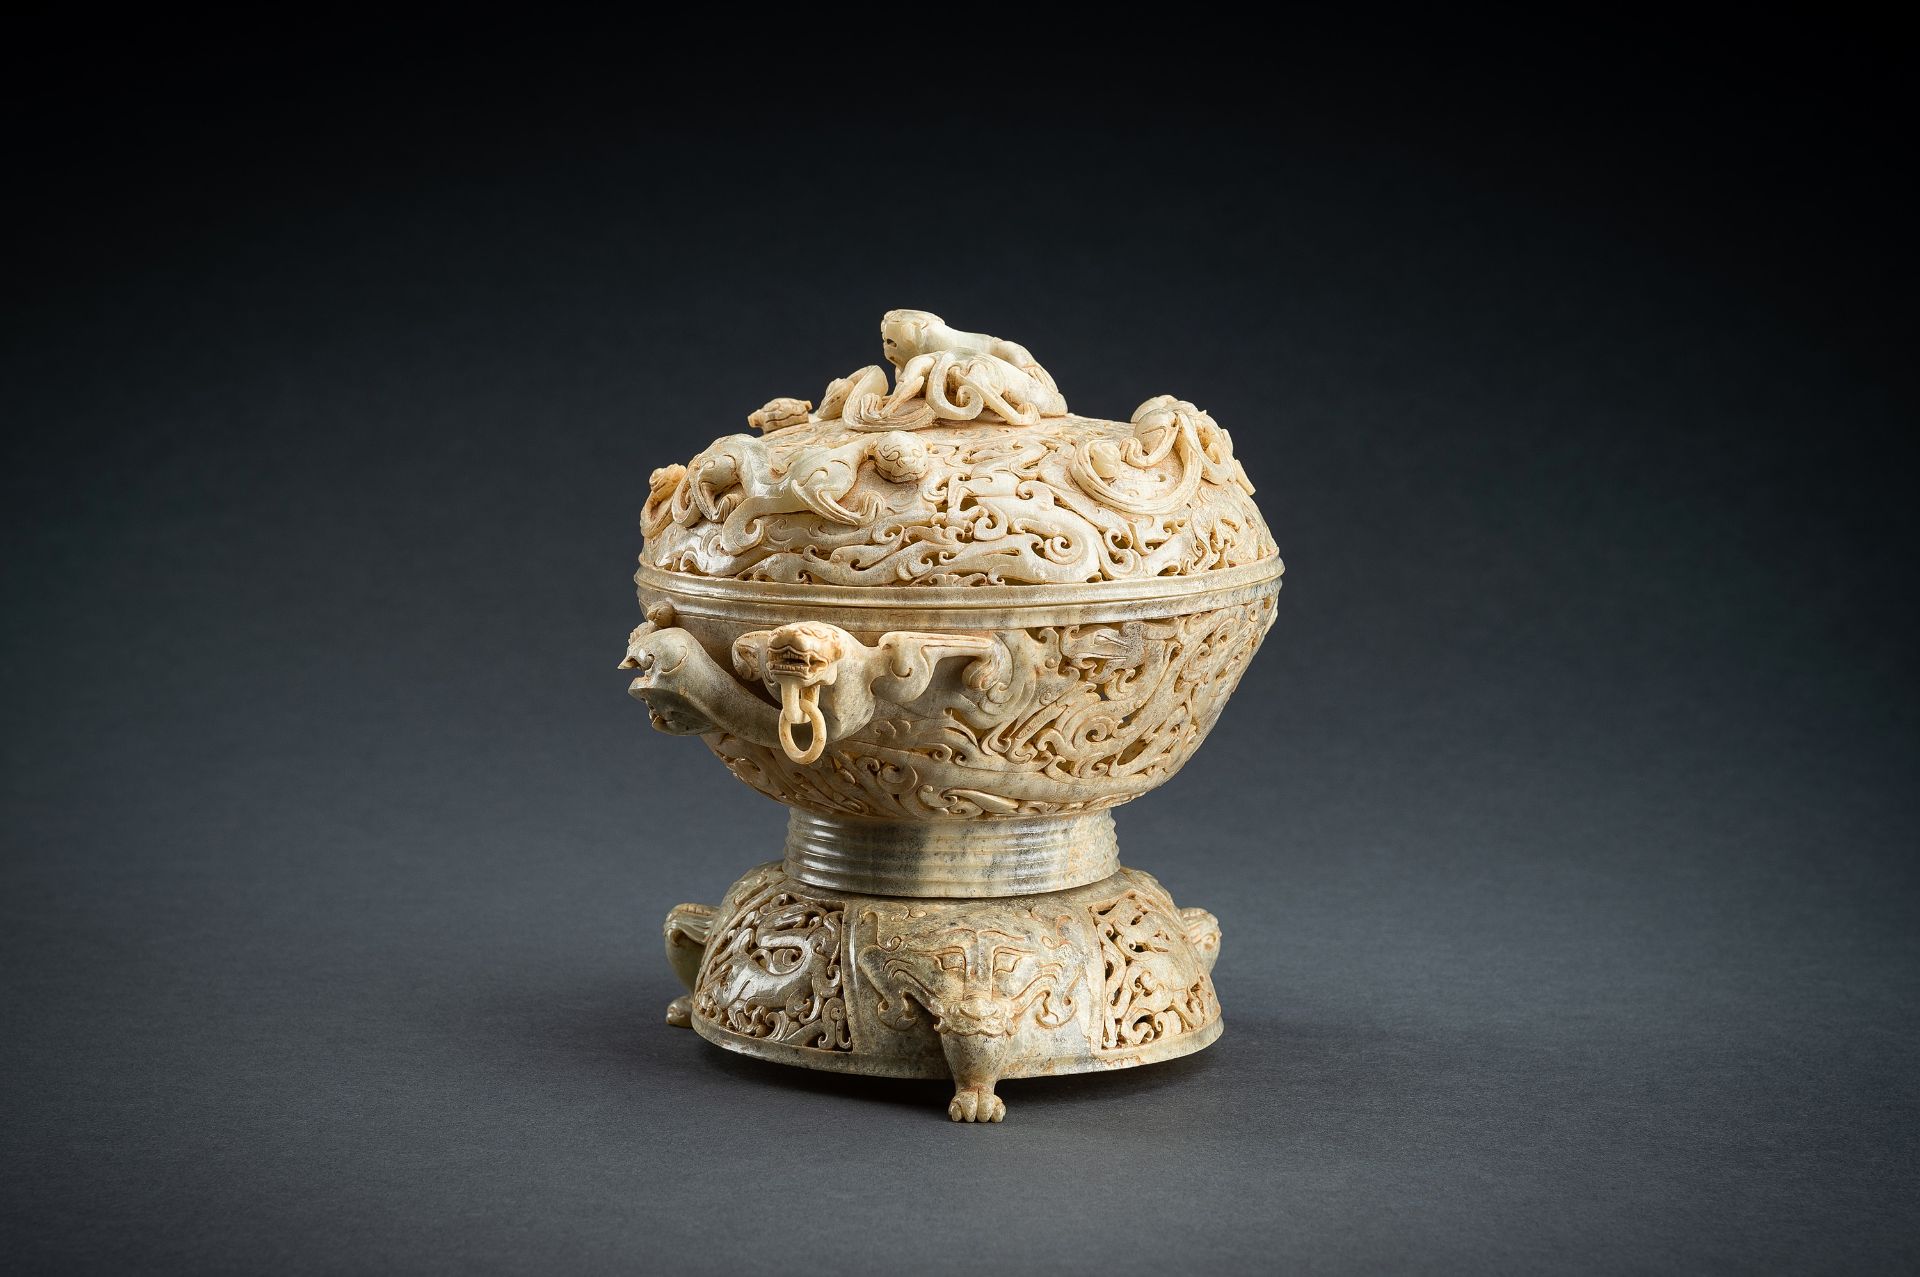 A LARGE AND IMPRESSIVE 3-PART RETICULATED CELADON JADE VESSEL - Image 4 of 19